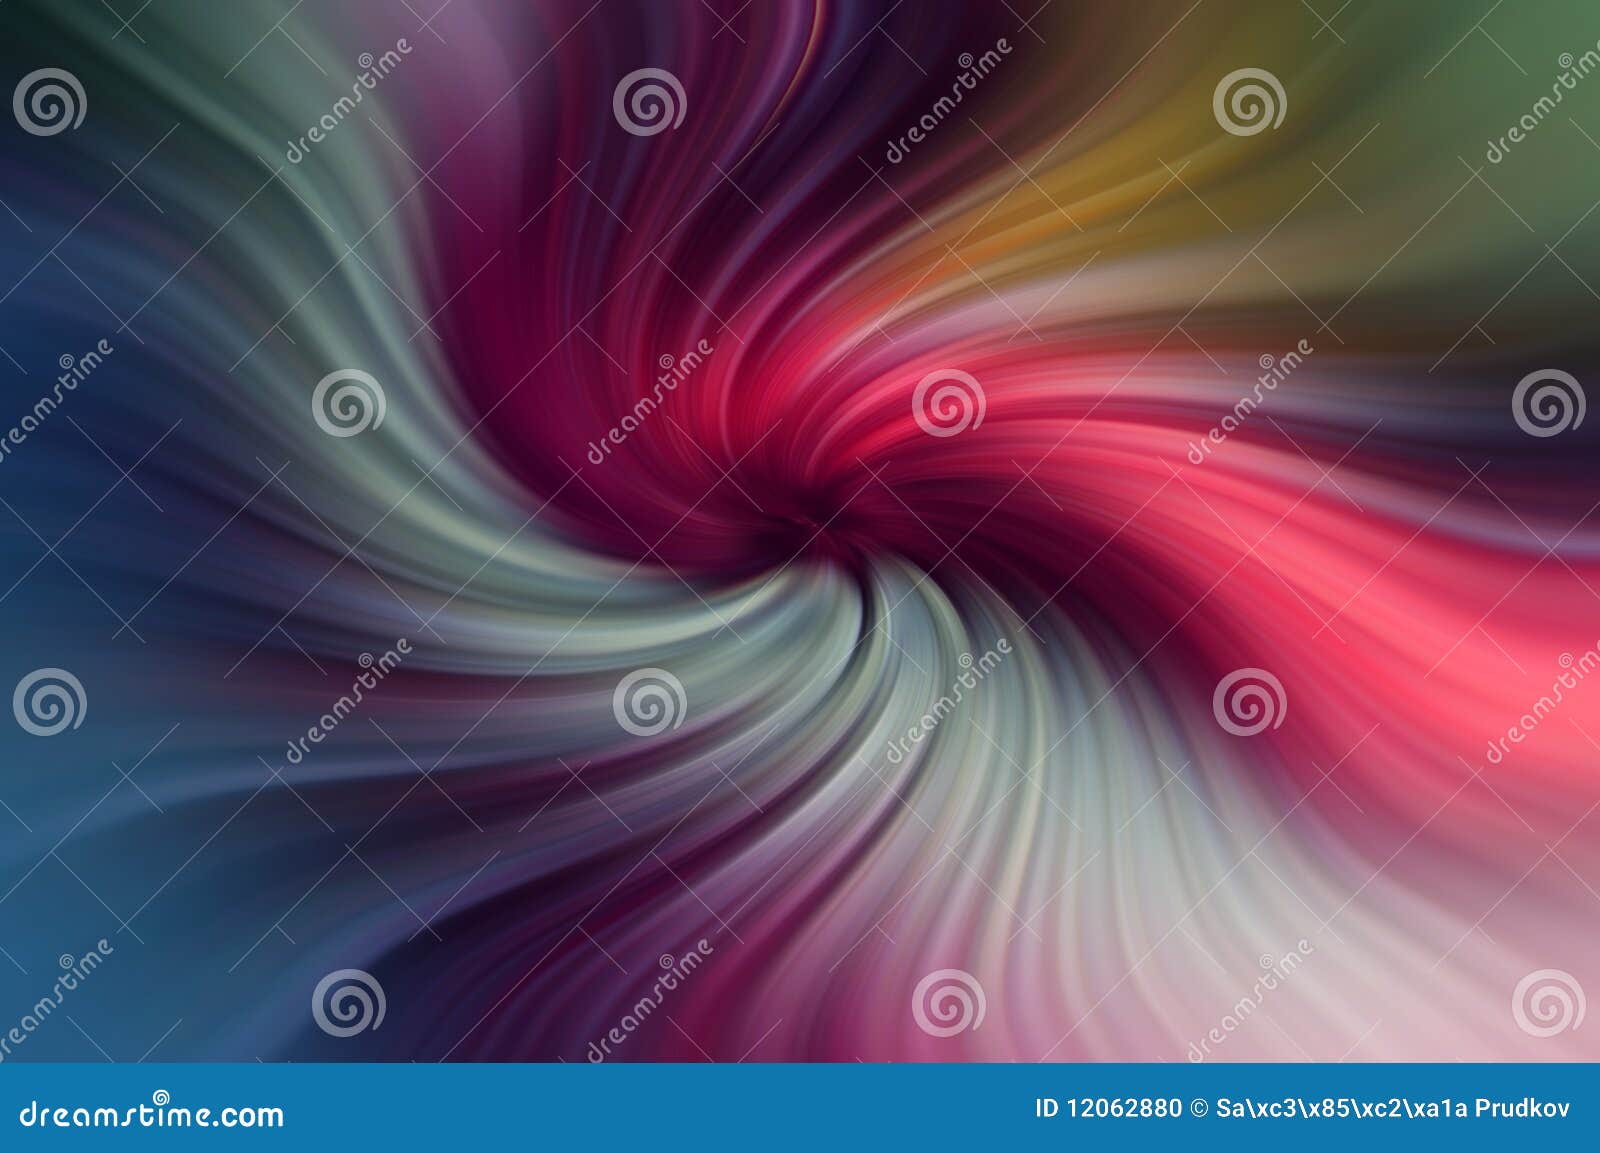 numerous folds of color that swirl around